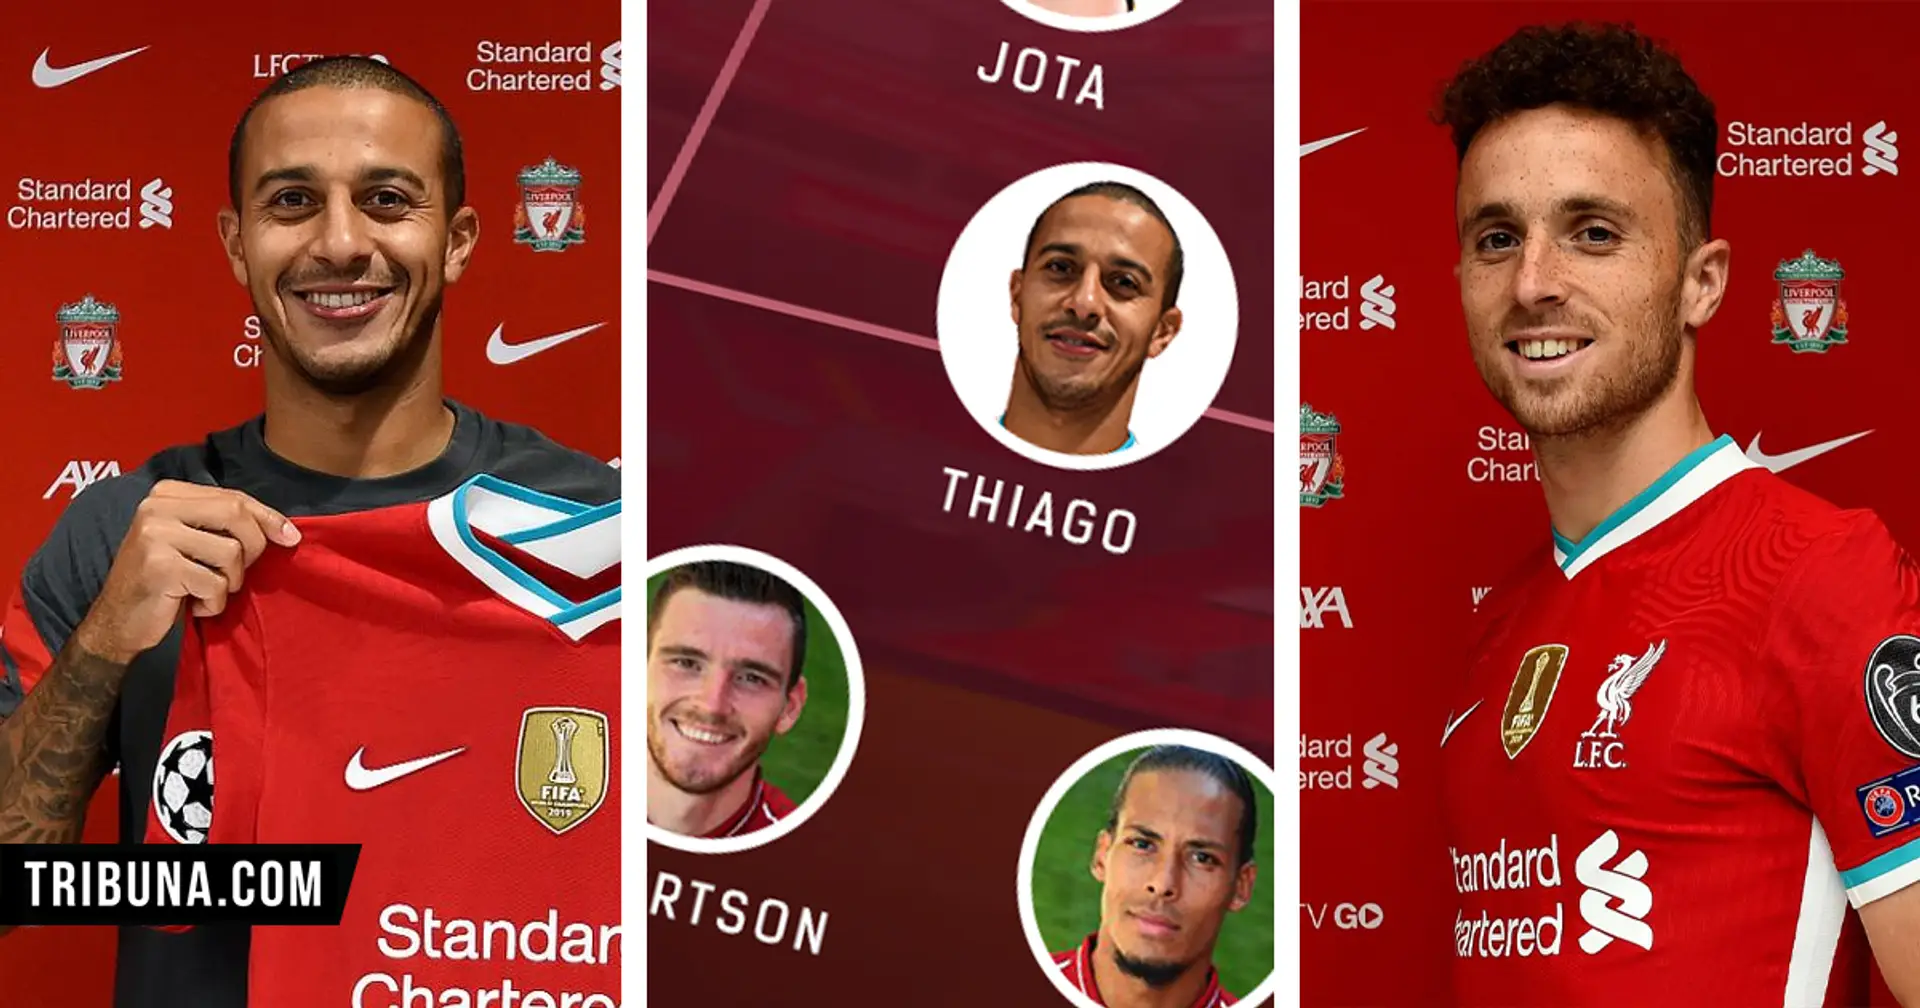 How Thiago and Jota could fit in at Liverpool: 3 potential line-ups